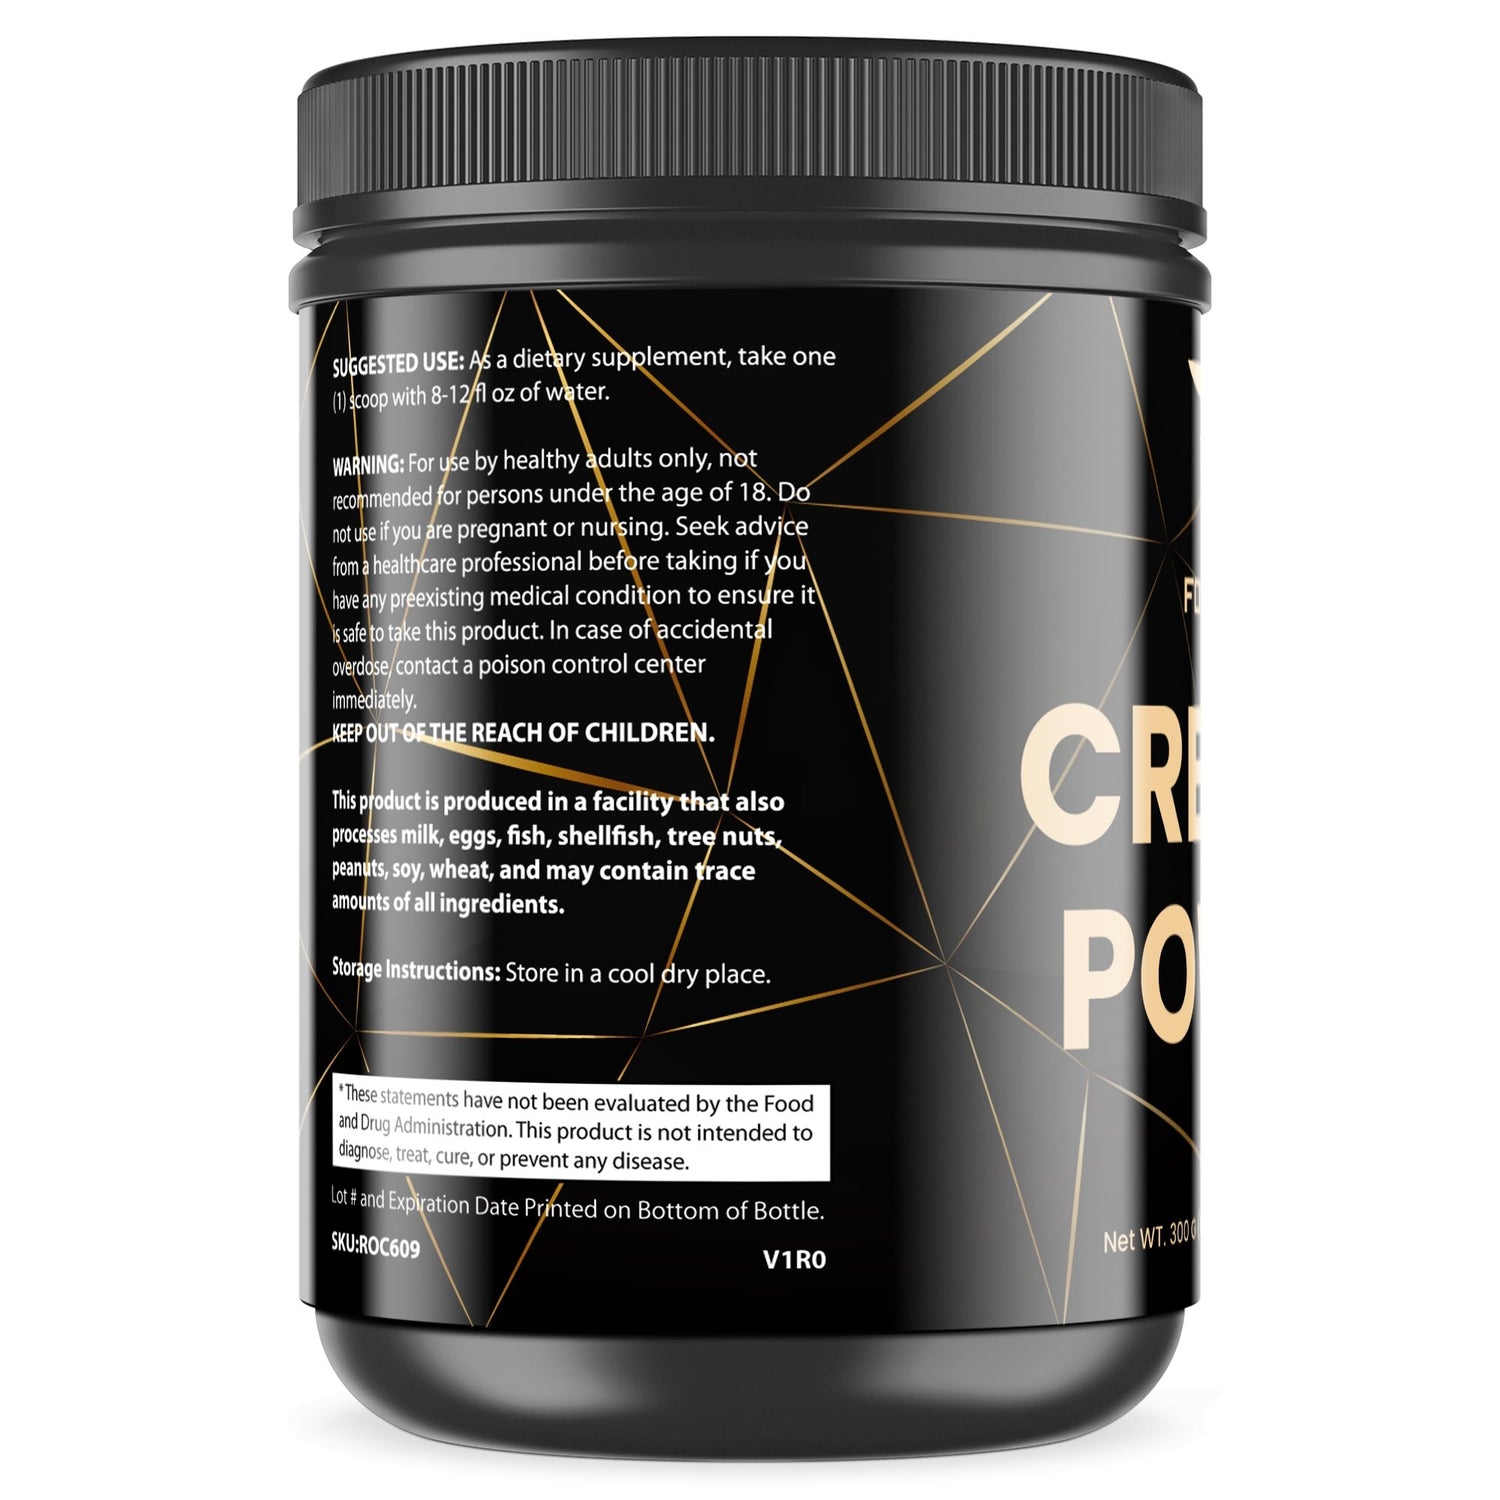 For Fathers Fitness Creatine: Top Quality, No Filler, Muscle Builder - For Fathers Fitness